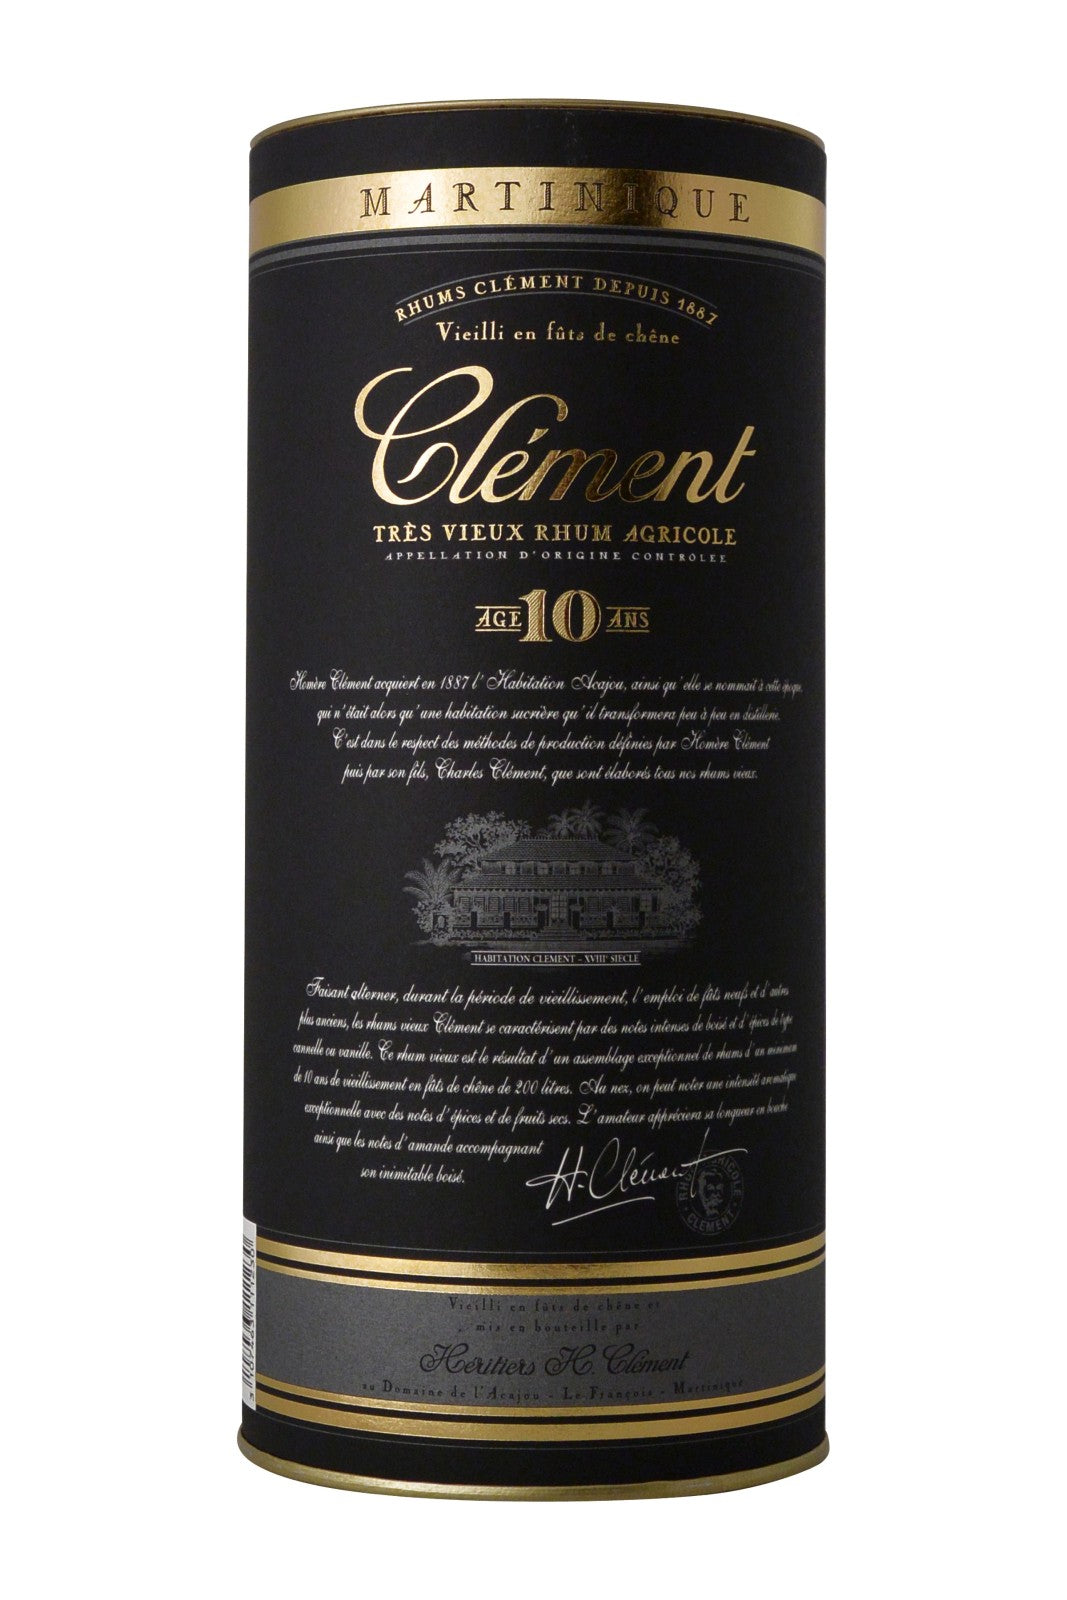 Clement Vieux 10 Year Old